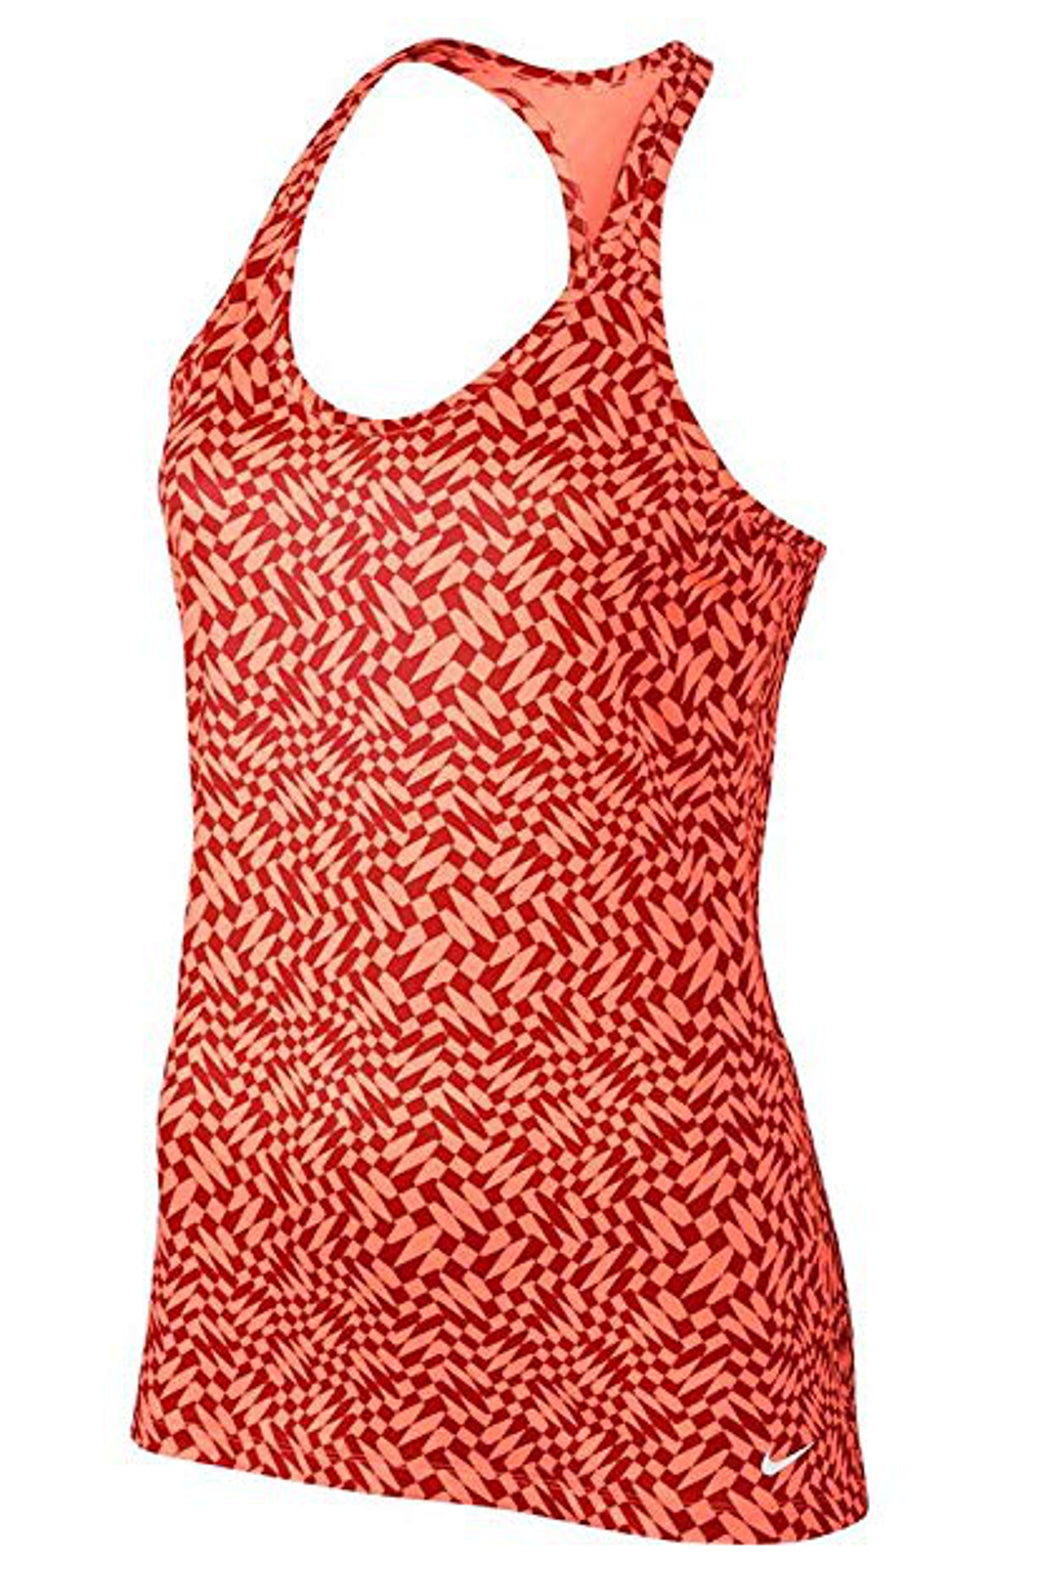 Nike Womens Get Fit Checker Top